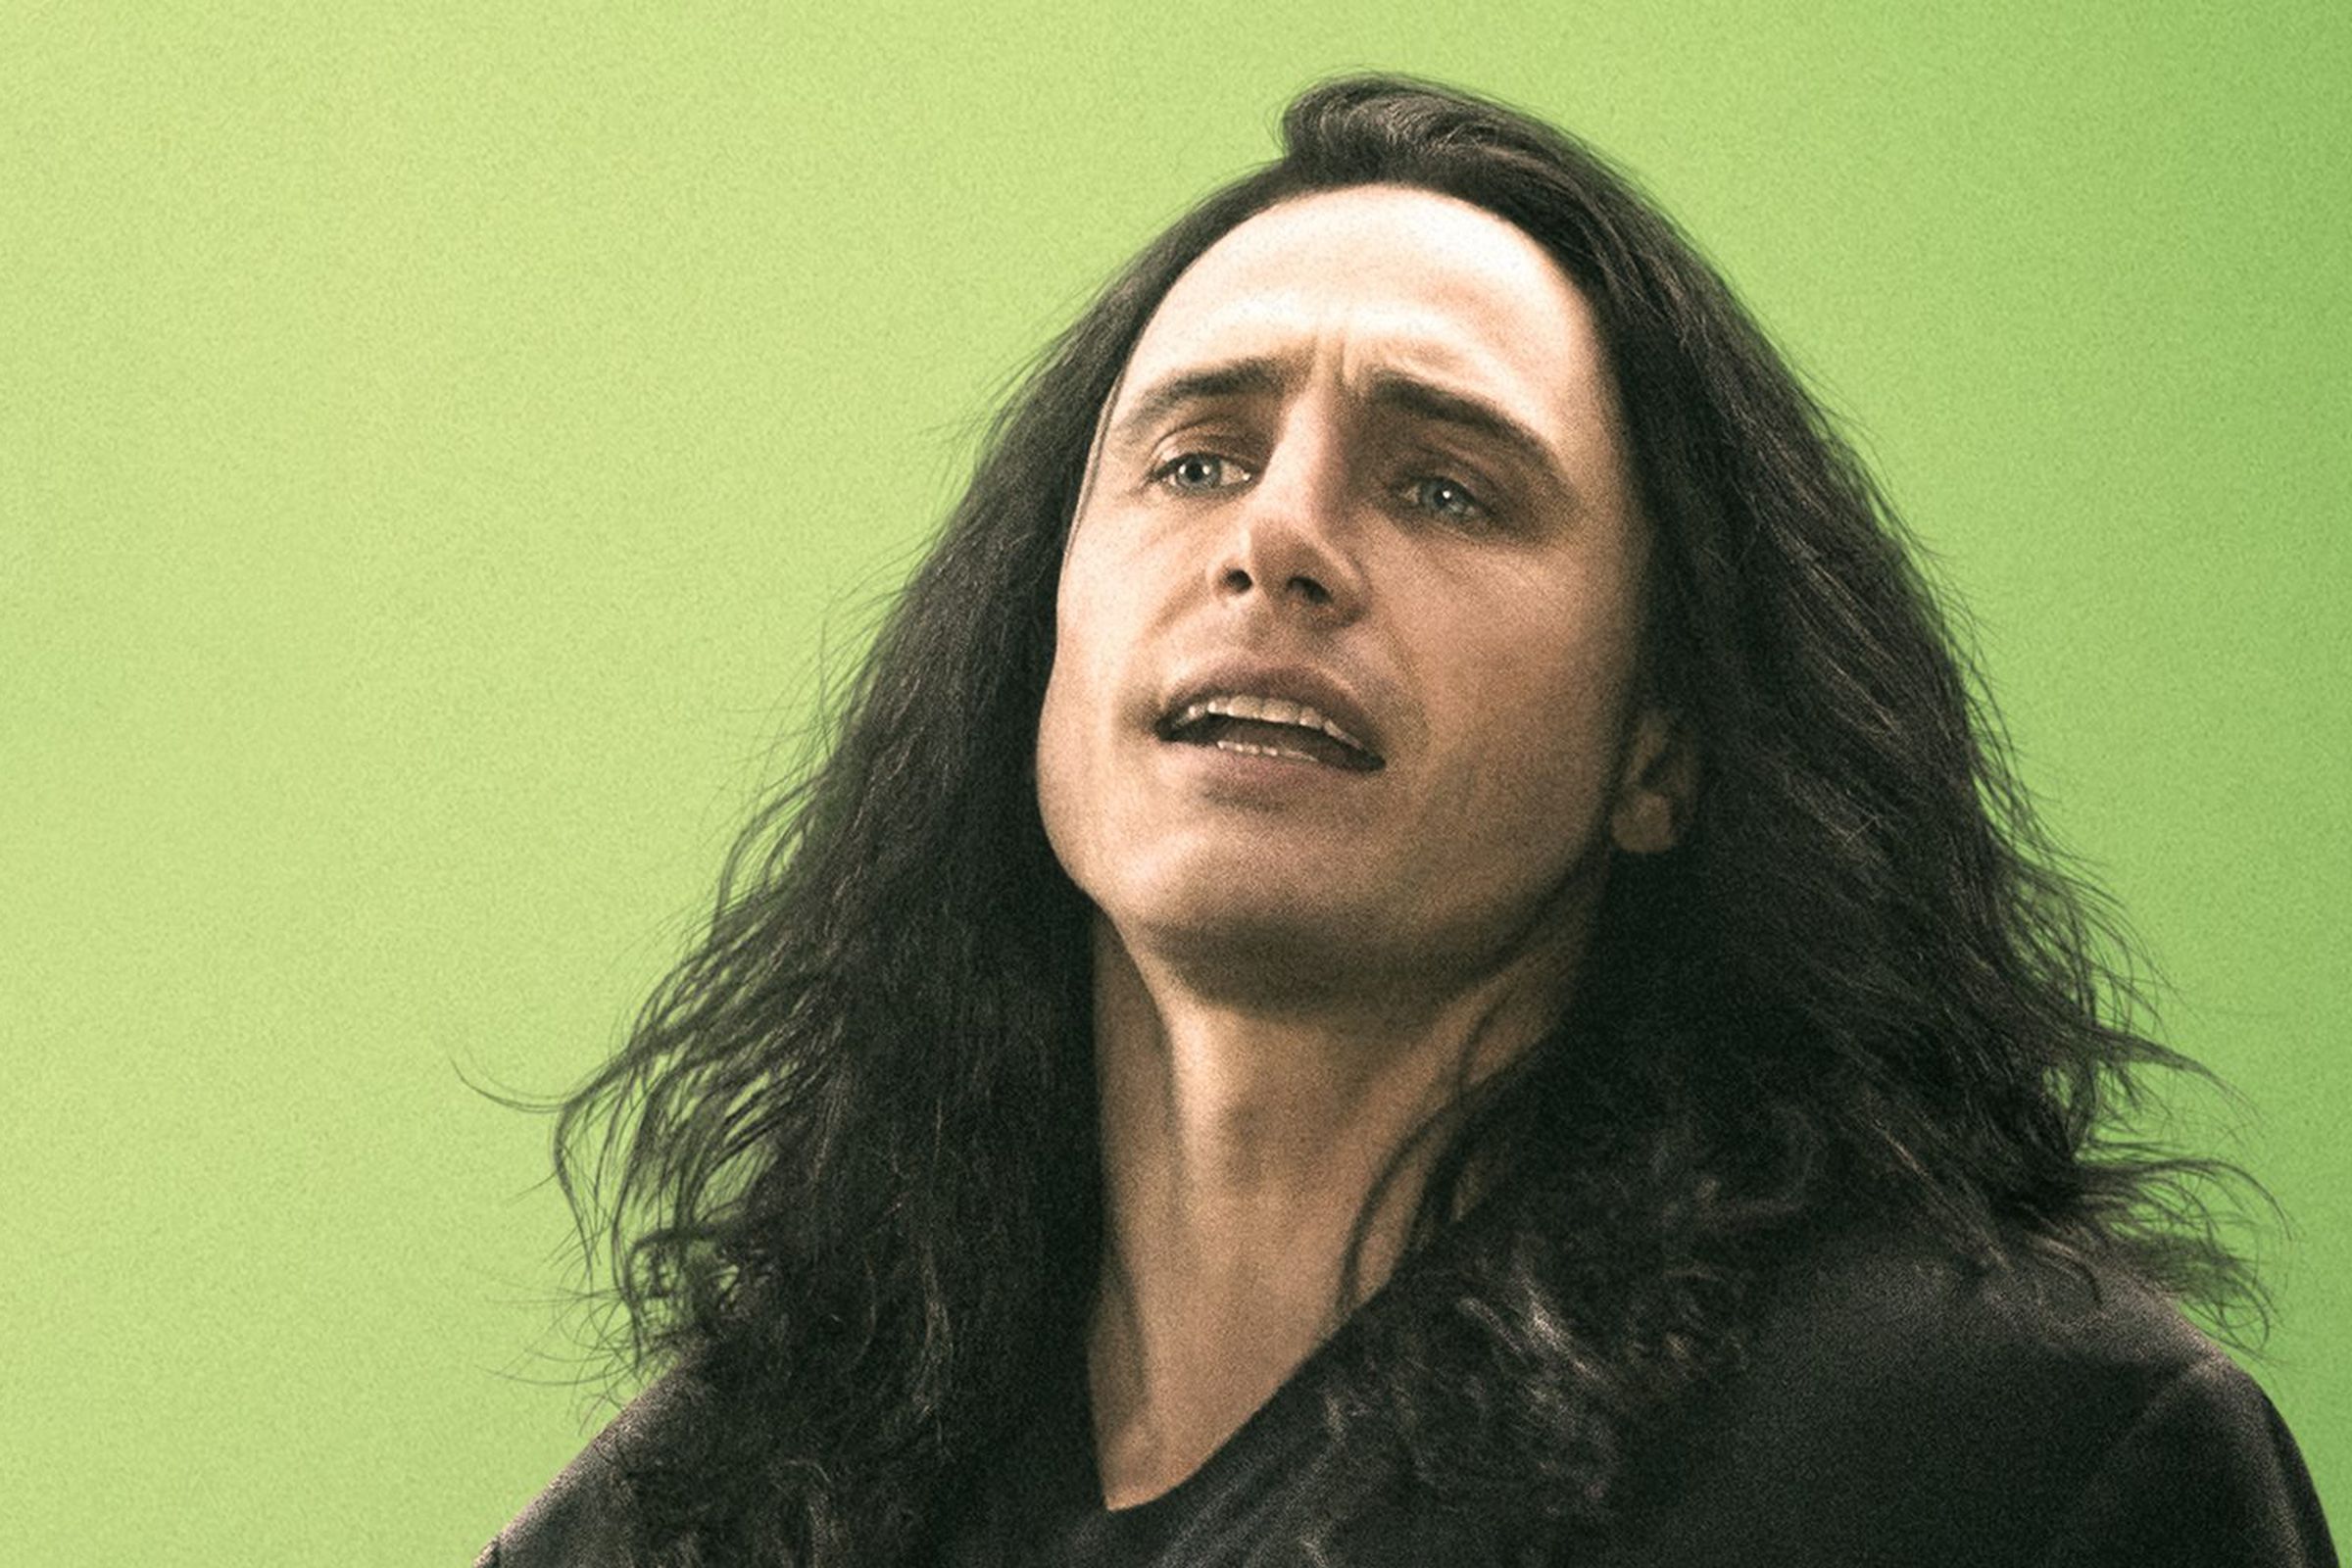 The Disaster Artist photo